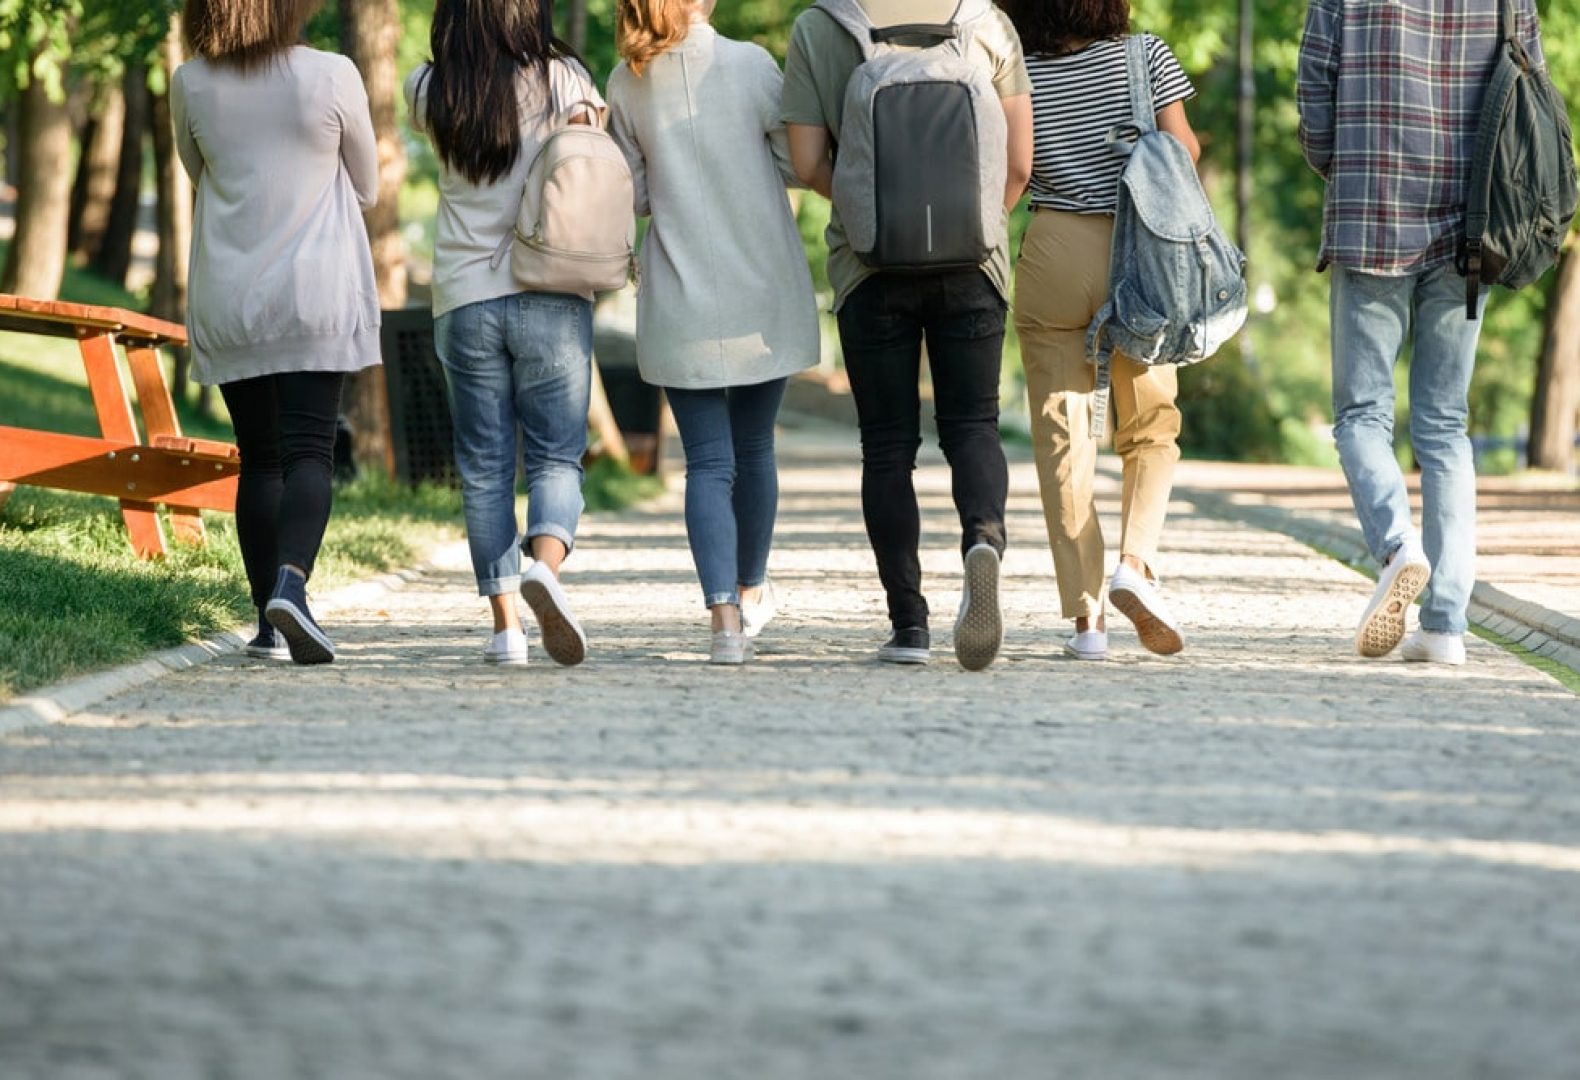 Background view of young adults walking on foot path